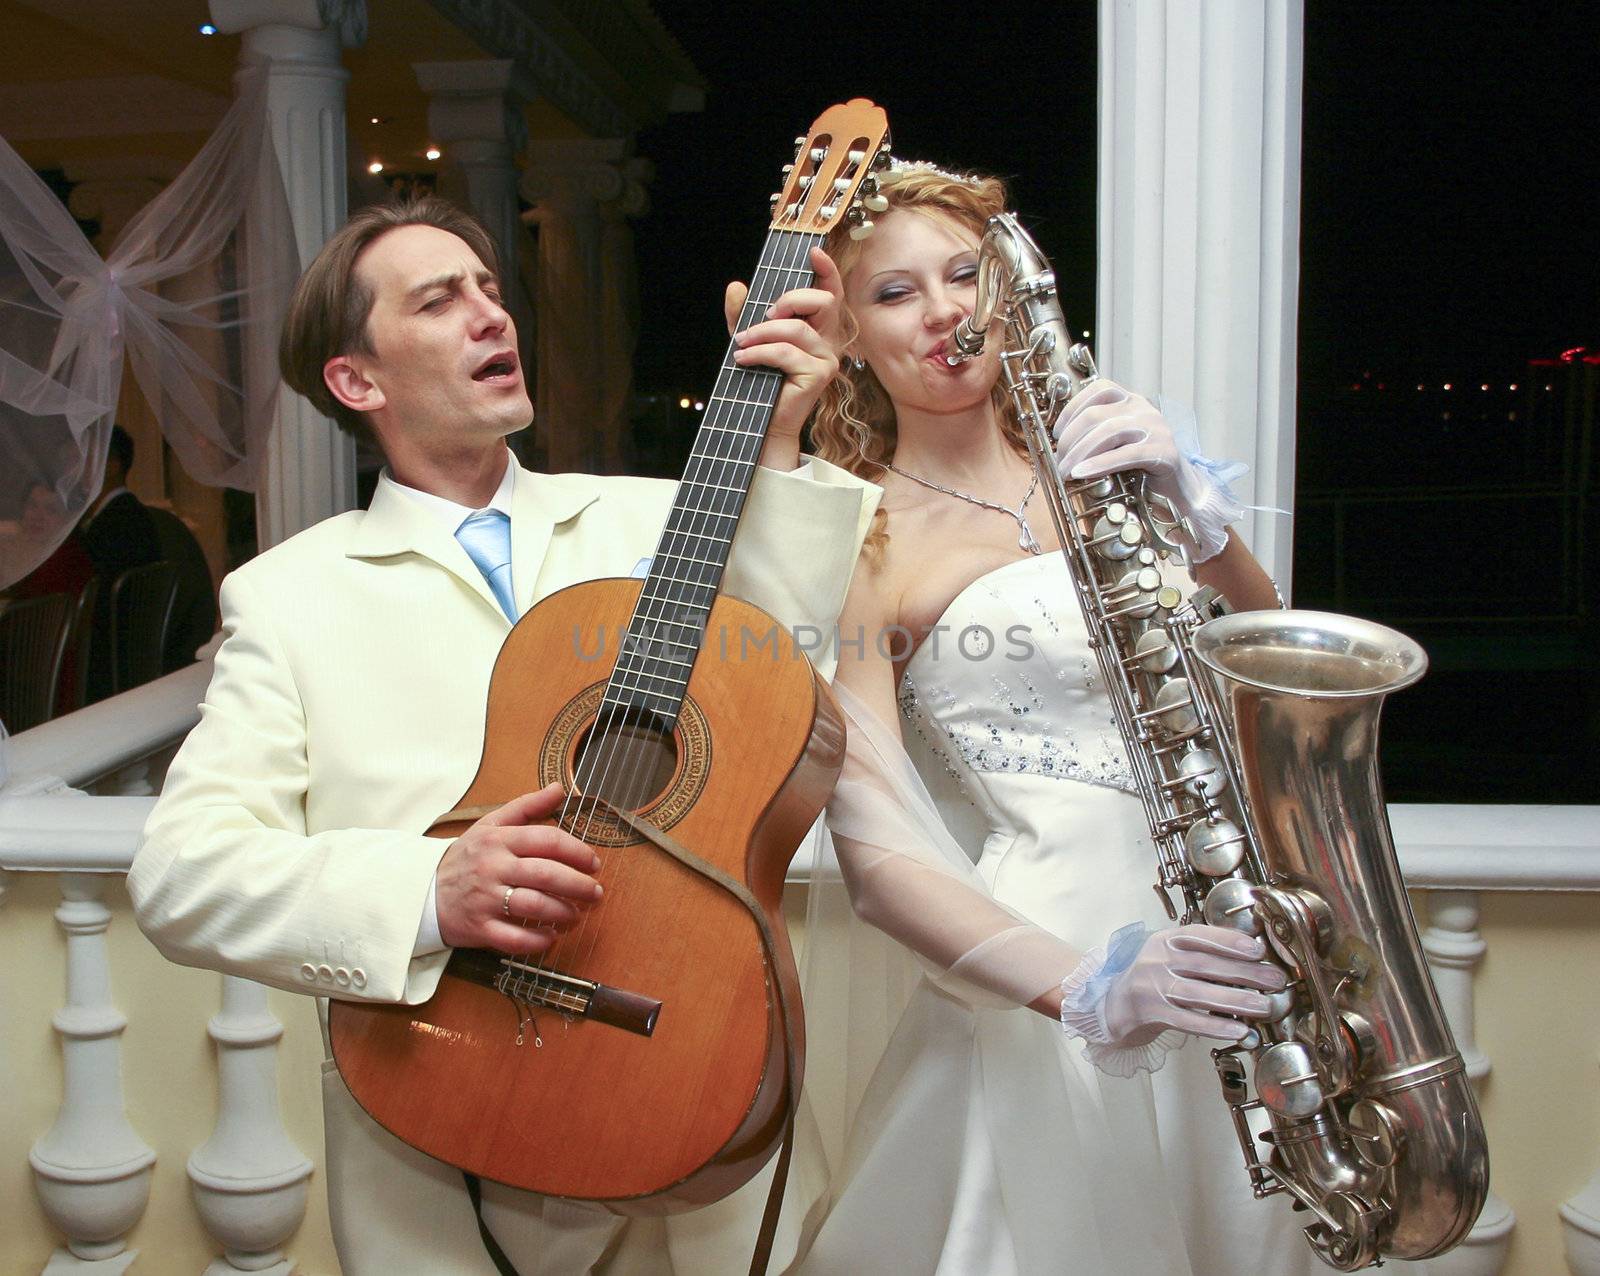 The bride and groom are entertained guests at a party in honor o by NickNick